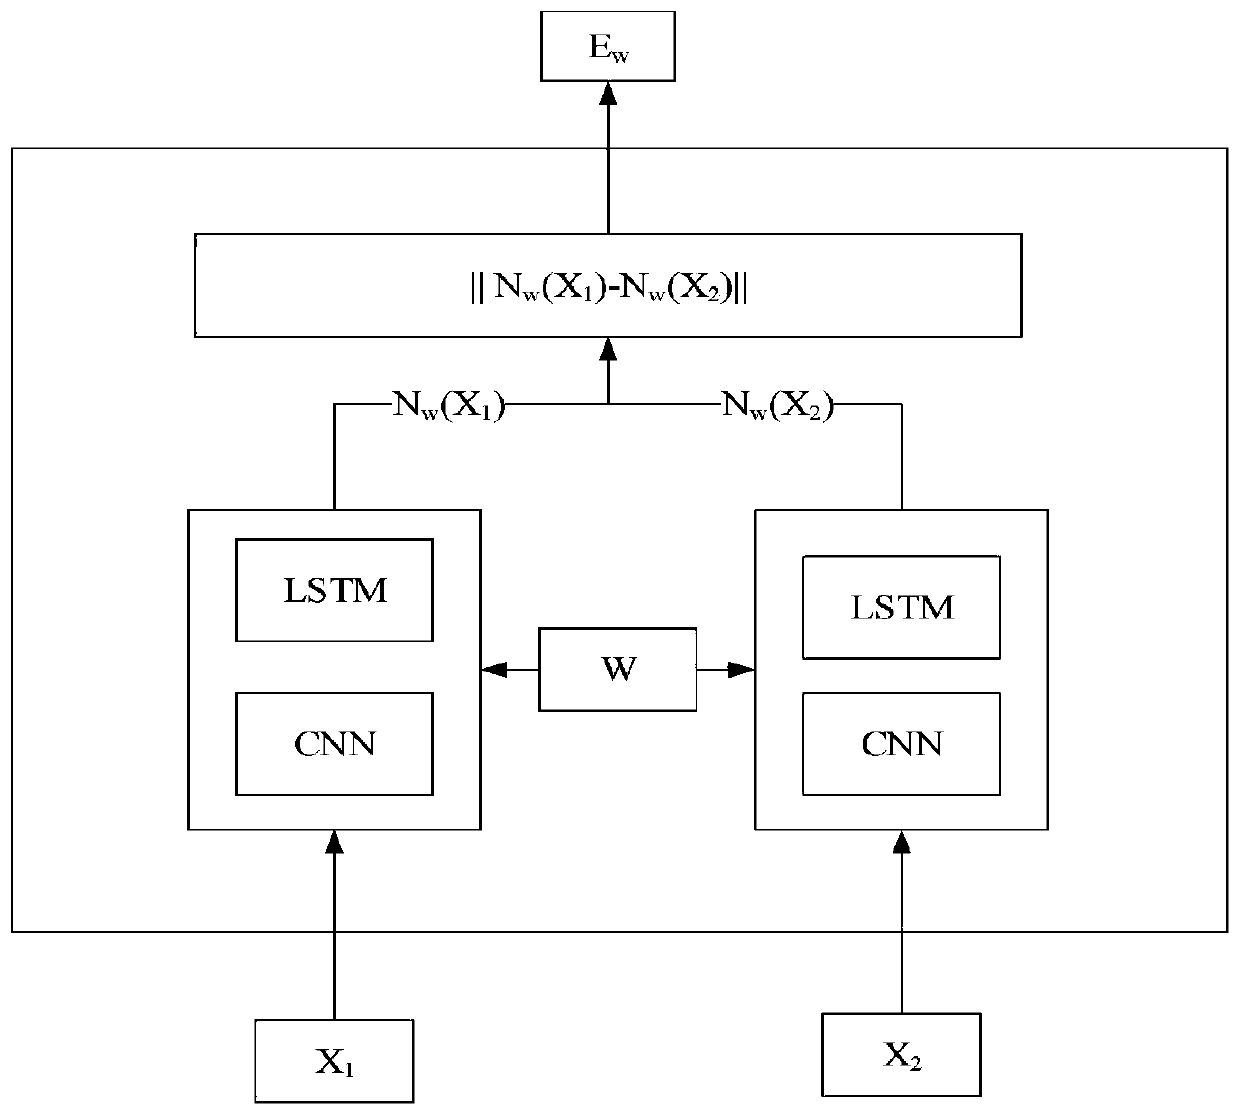 Network transaction fraud detection system based on twin neural network